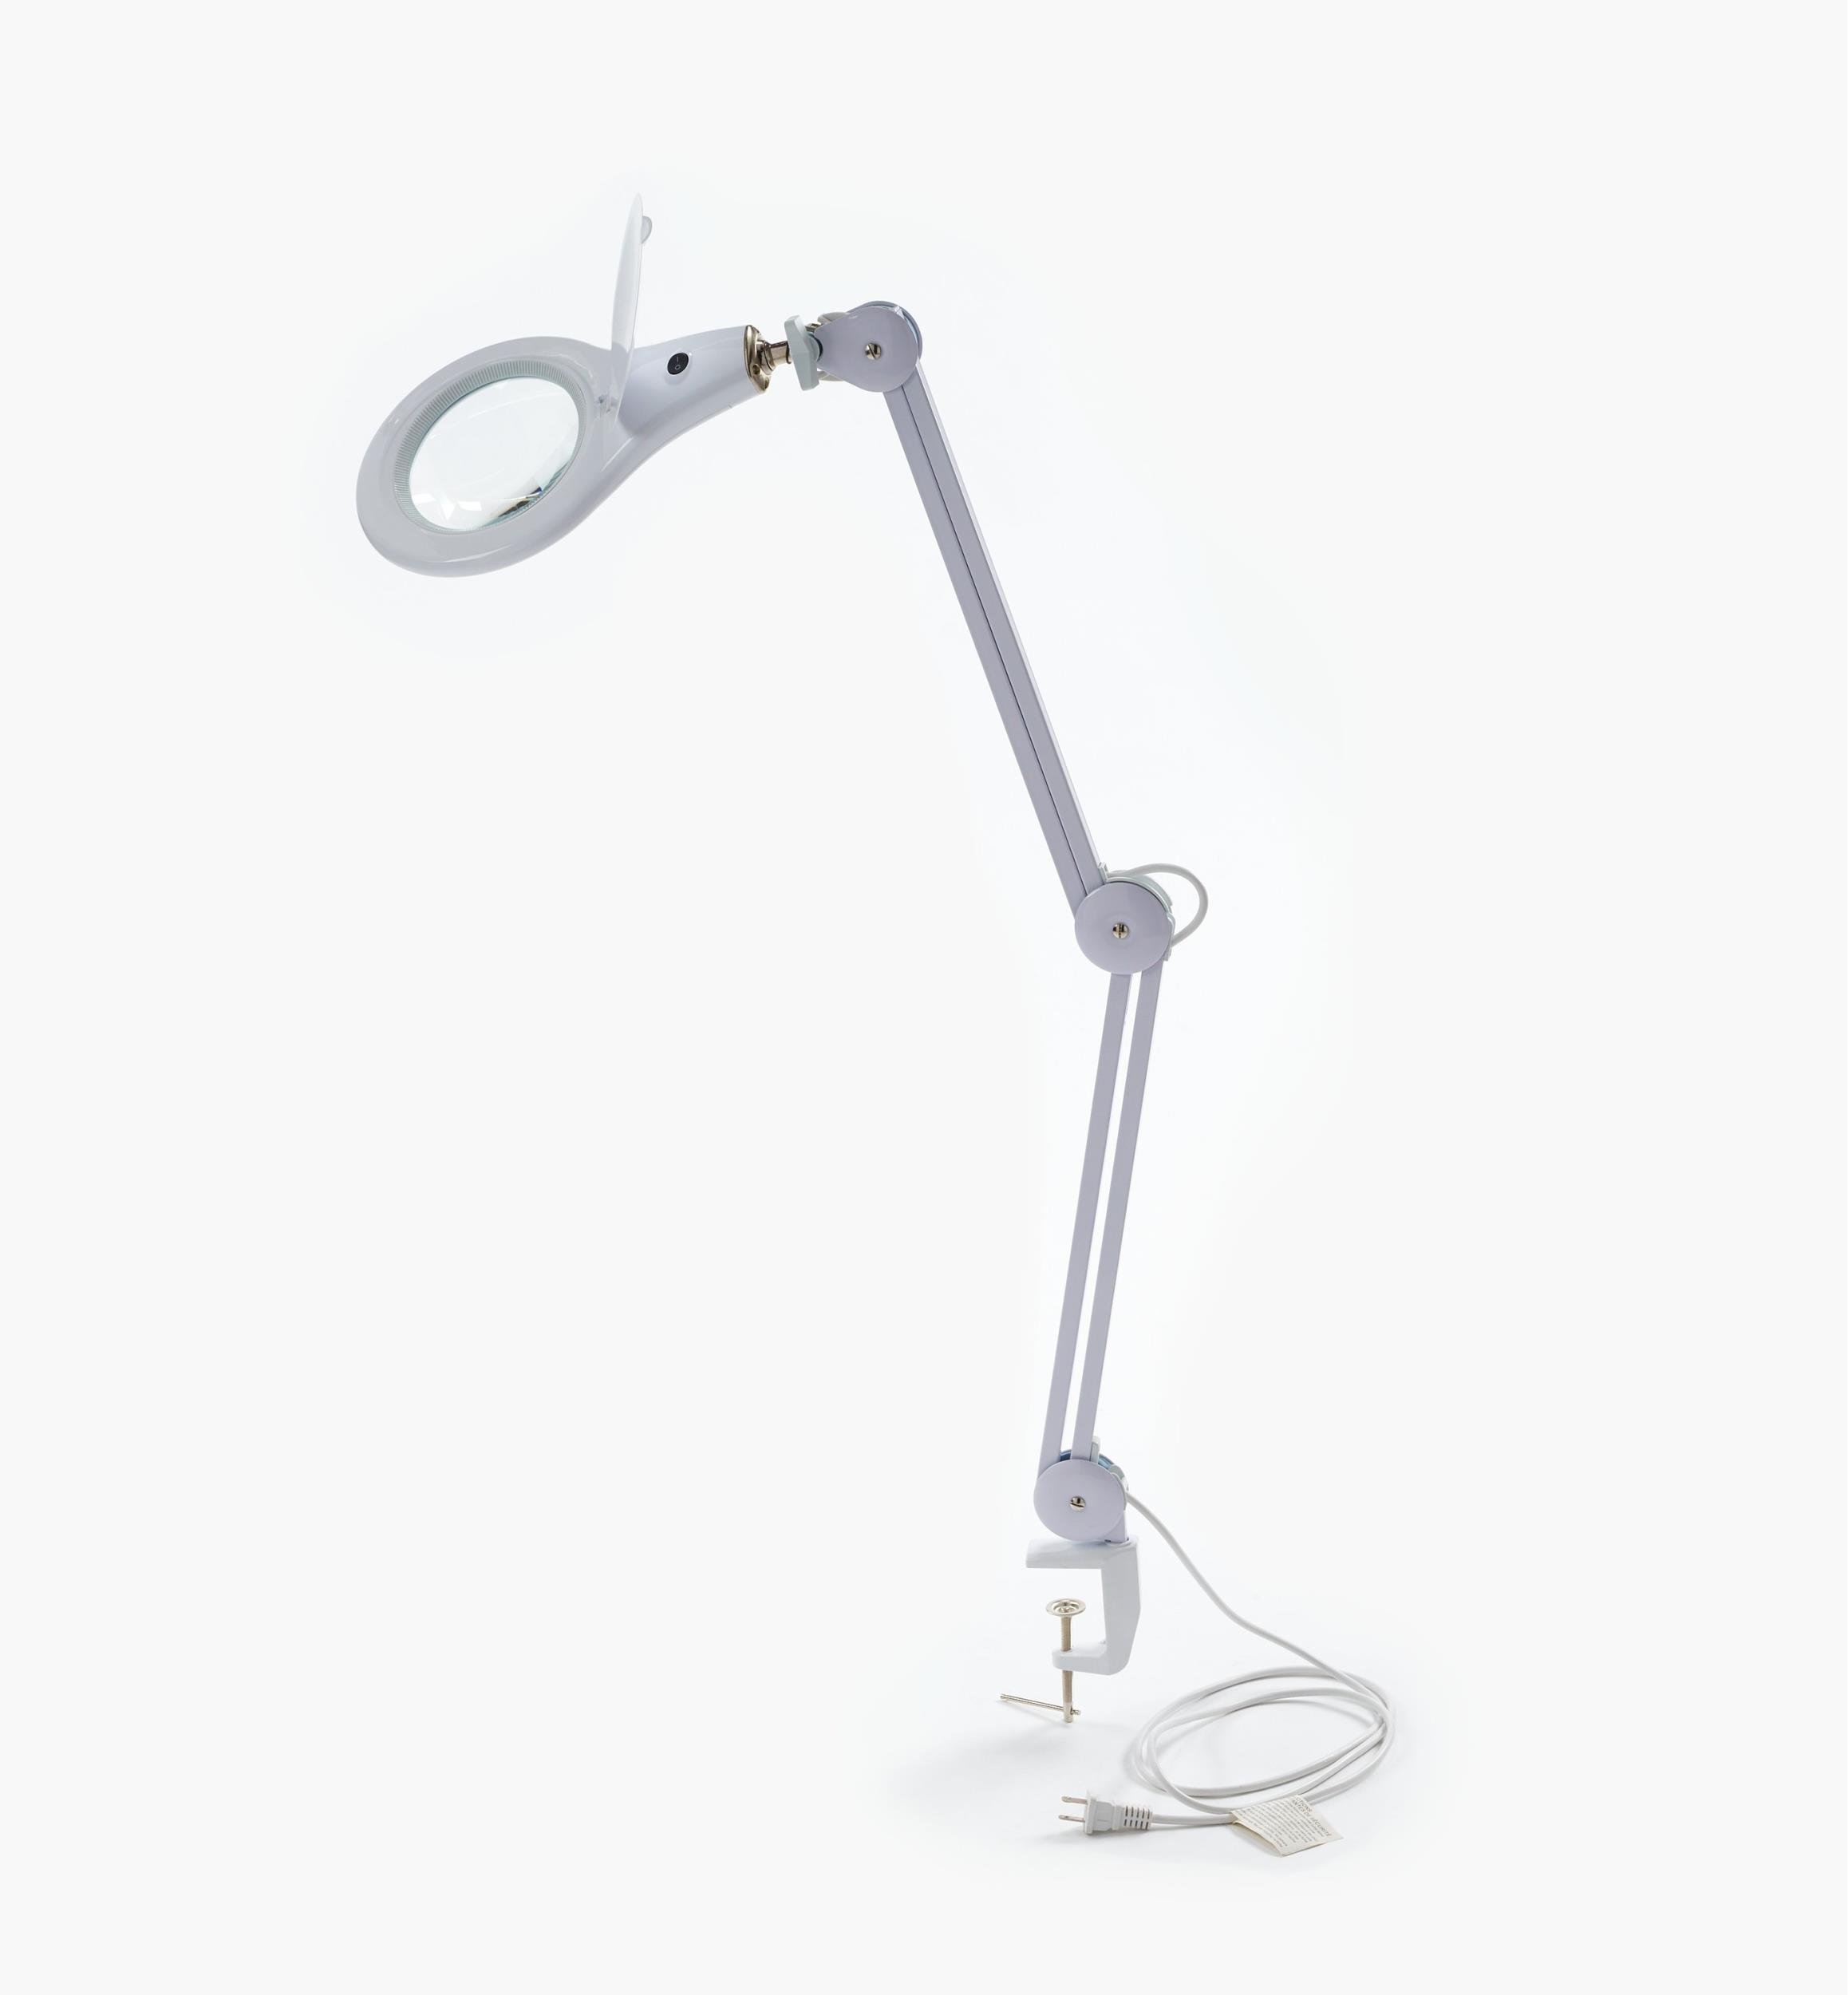 Led Magnifying Bench Lamp Lee Valley, Desk Lamp With Magnifier Canada